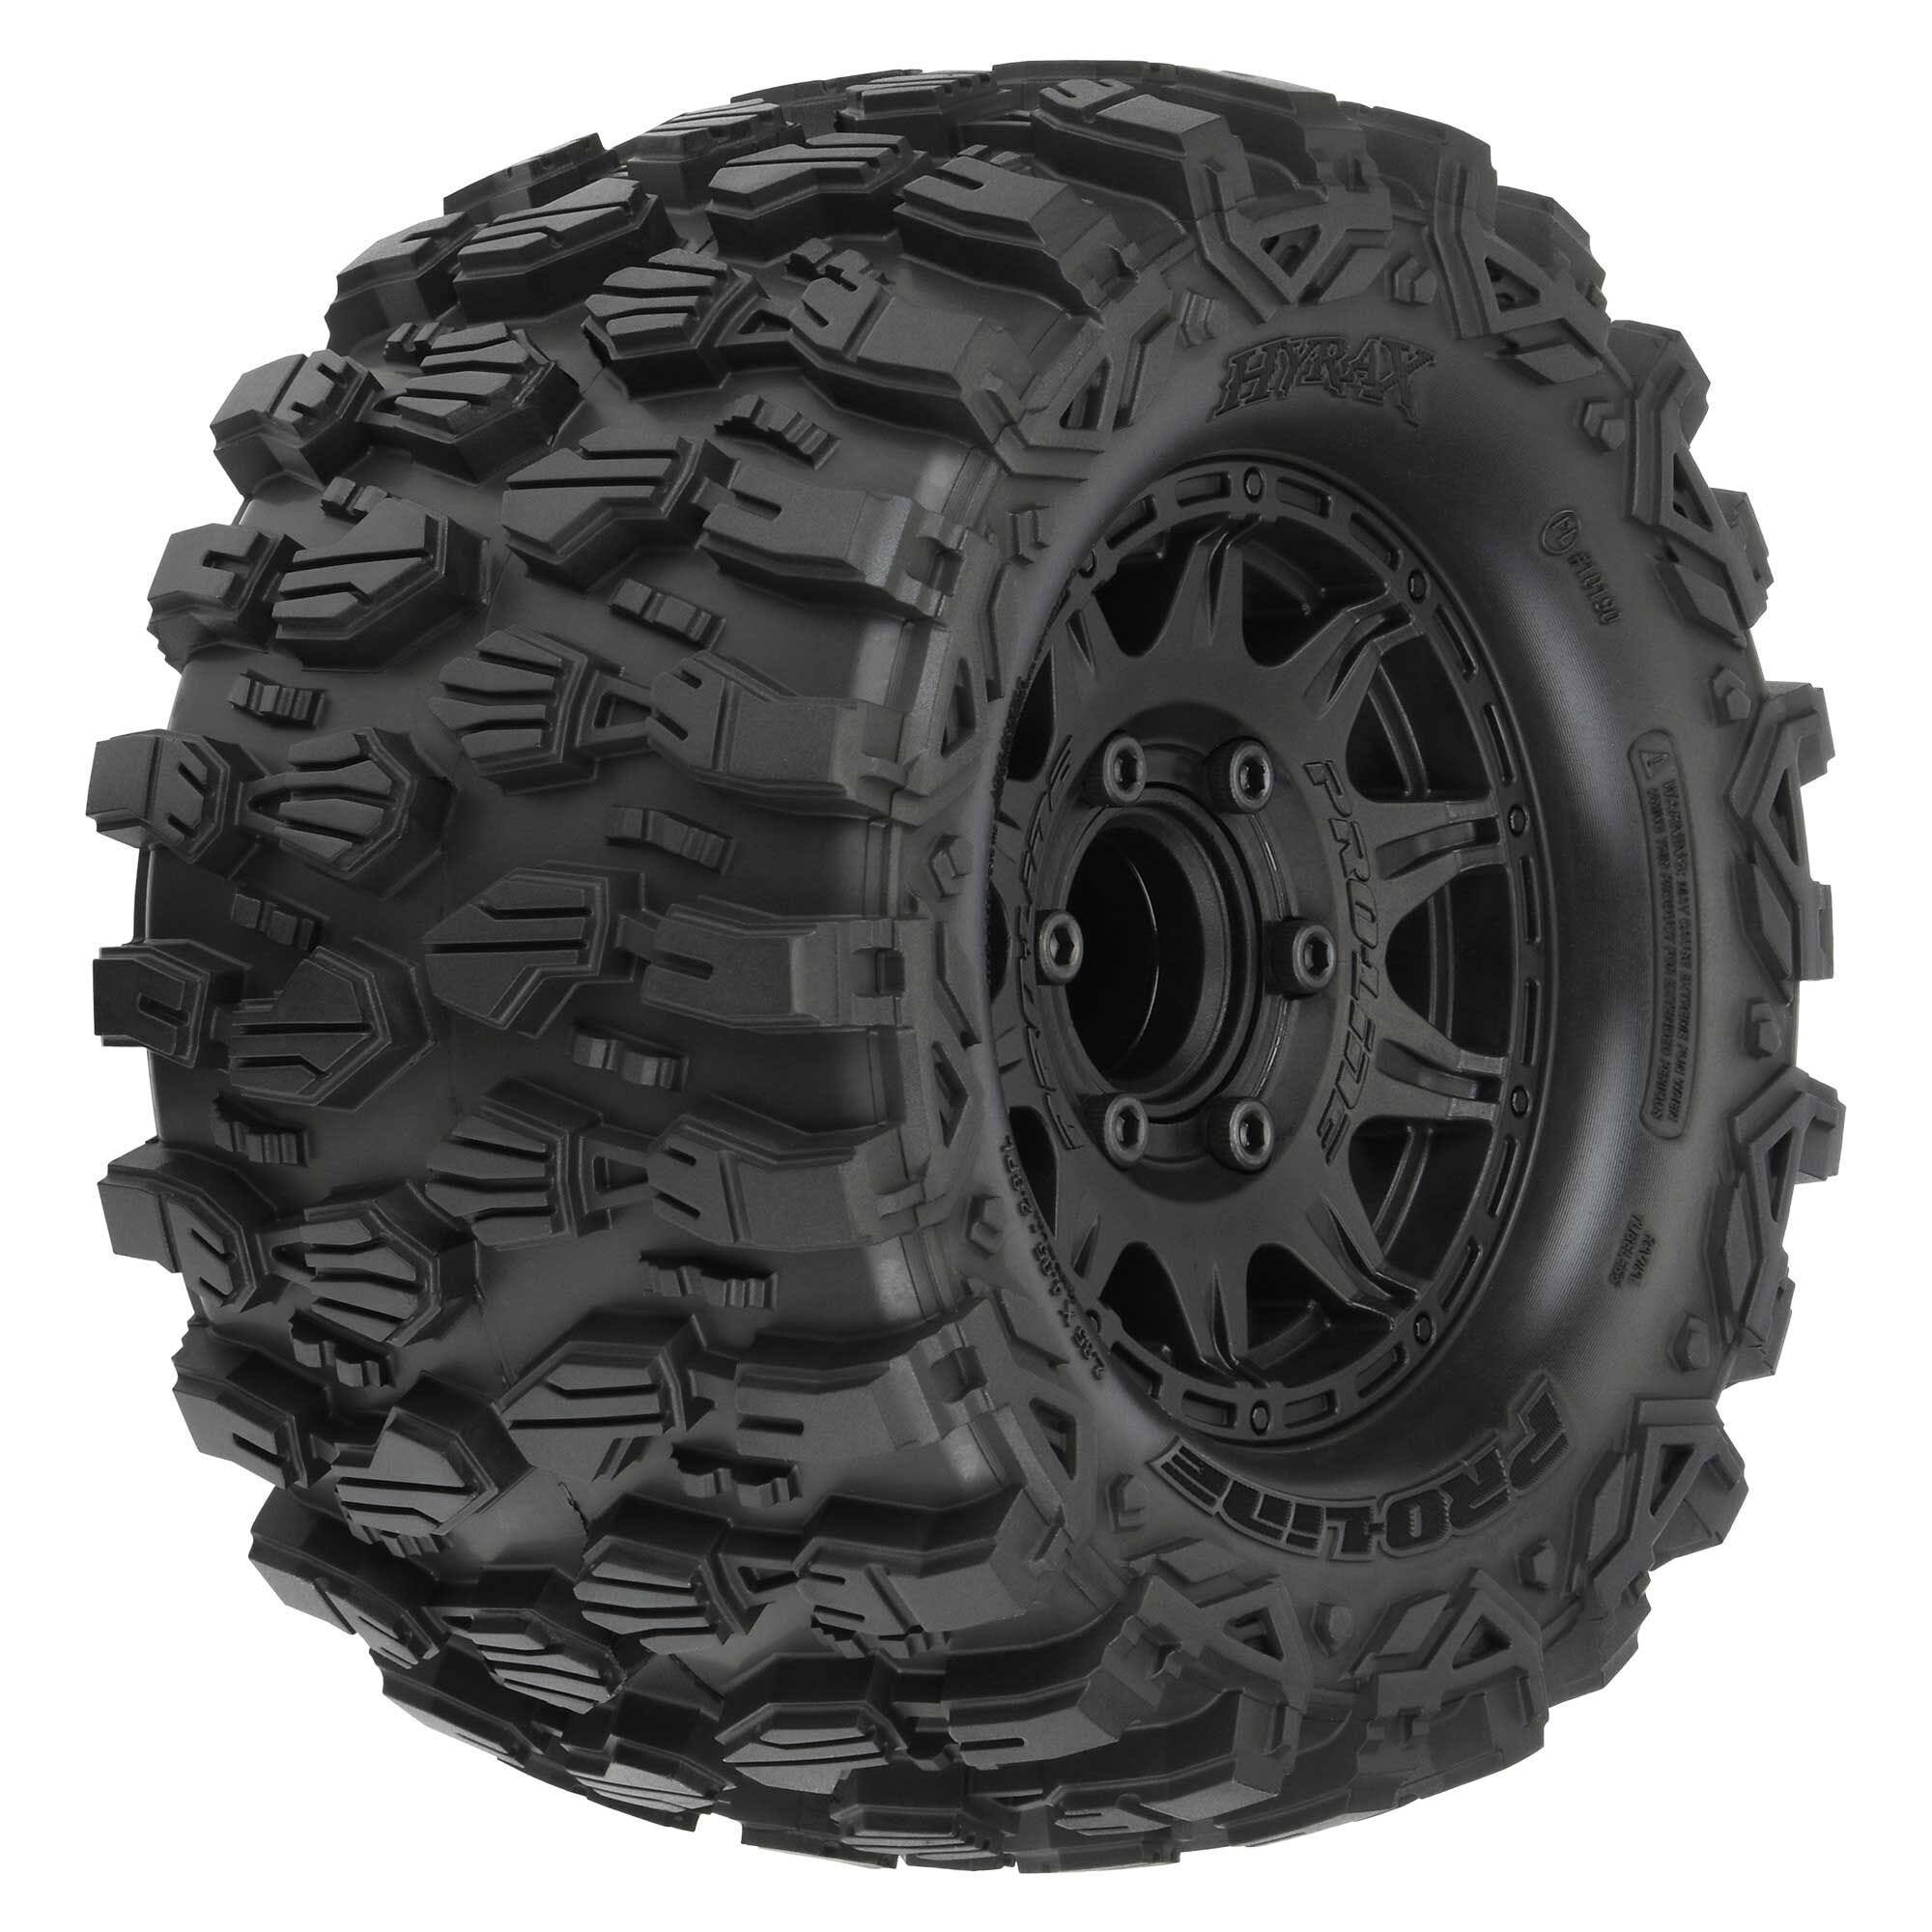 Pro-Line Racing 1/10 Hyrax Front/Rear 2.8" MT Tires Mounted 12mm Black Raid 2 Pro1019010